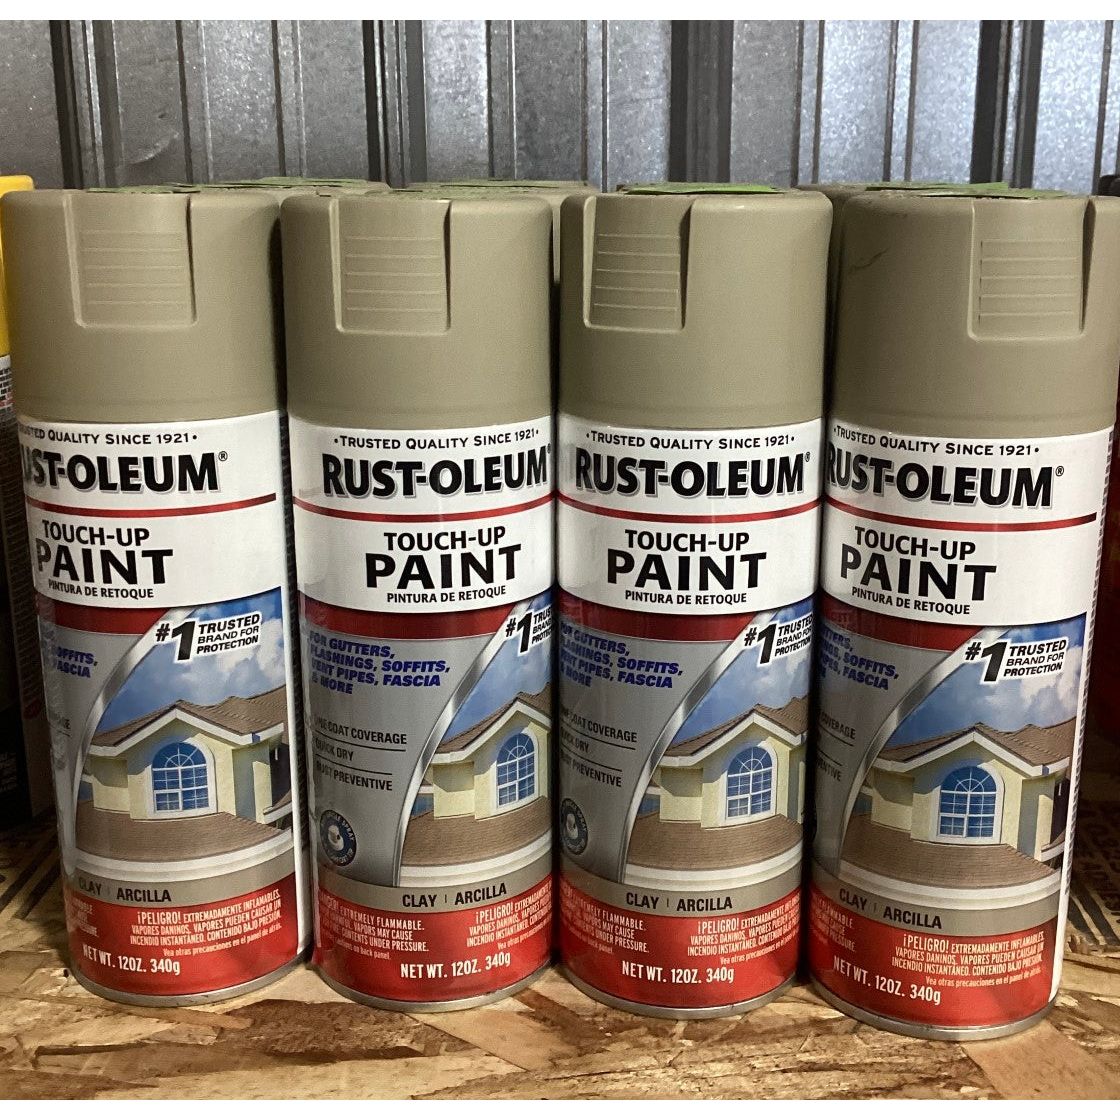 Rust-oleum clay colored touch-up spray paint